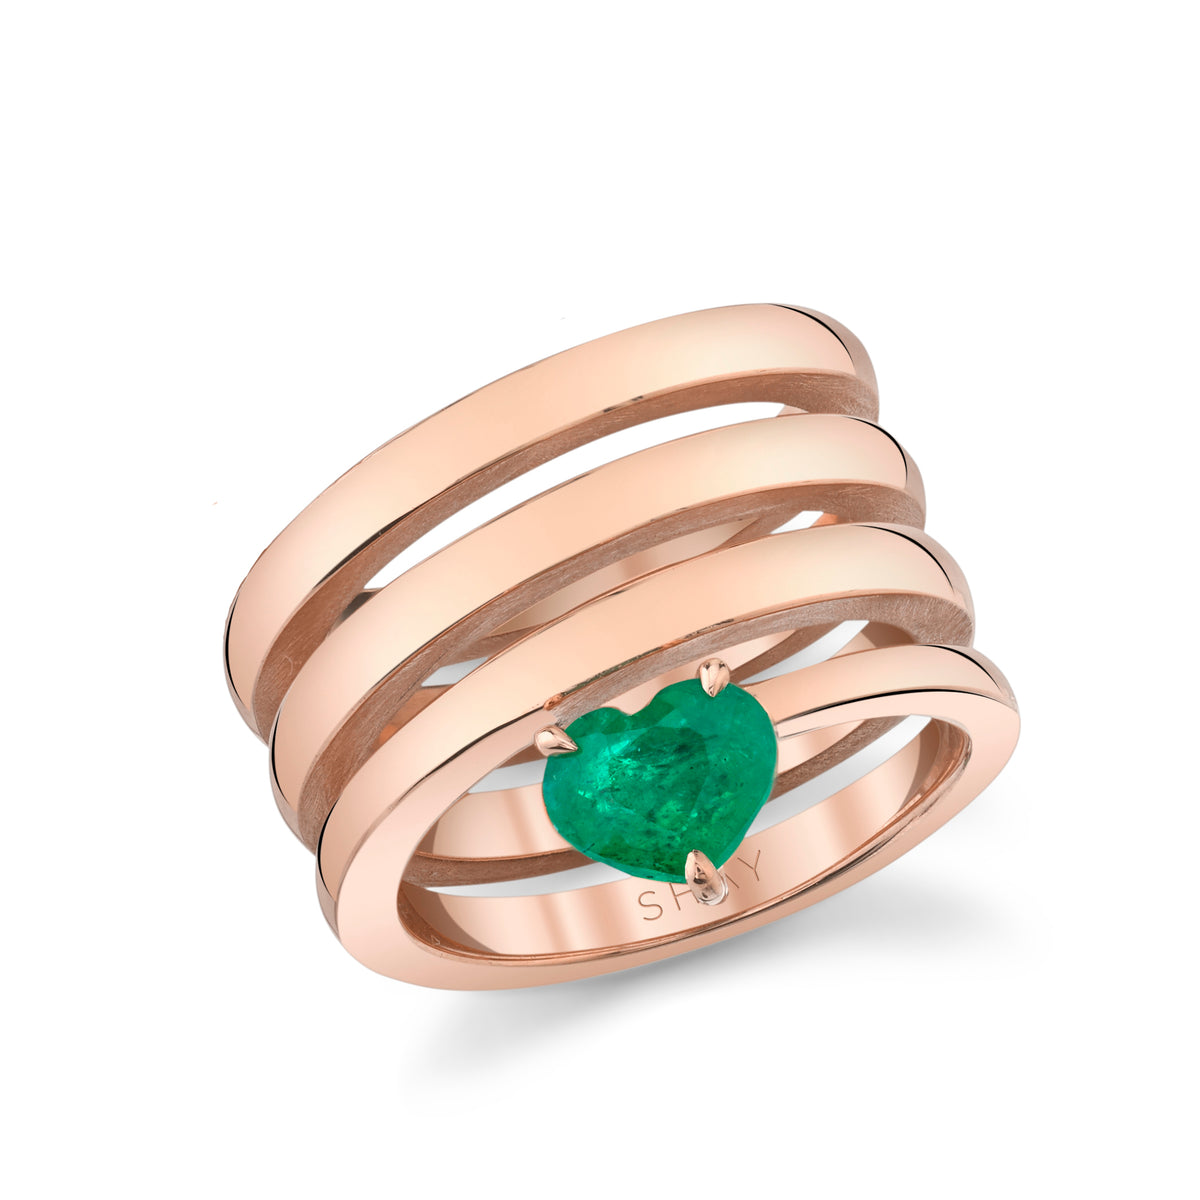 SOLID GOLD EMERALD SPIRAL HEART PINKY RING